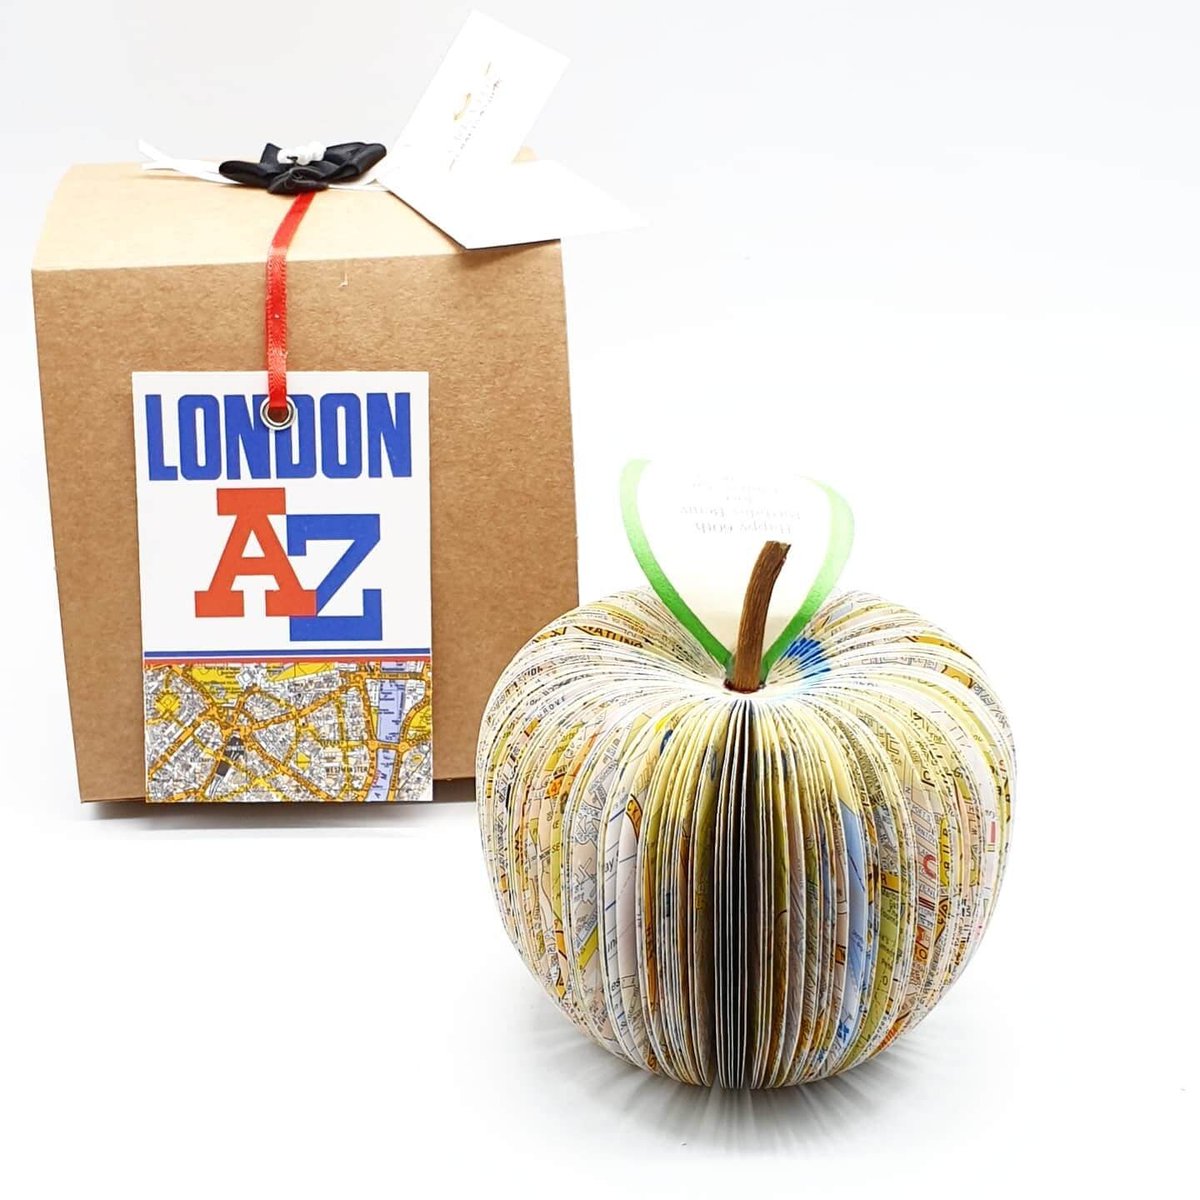 A-Z London Map Gift creatoncrafts.com/products/gift-… #CreatonCrafts #Shopify #mhhsbd #FruitAnniversary